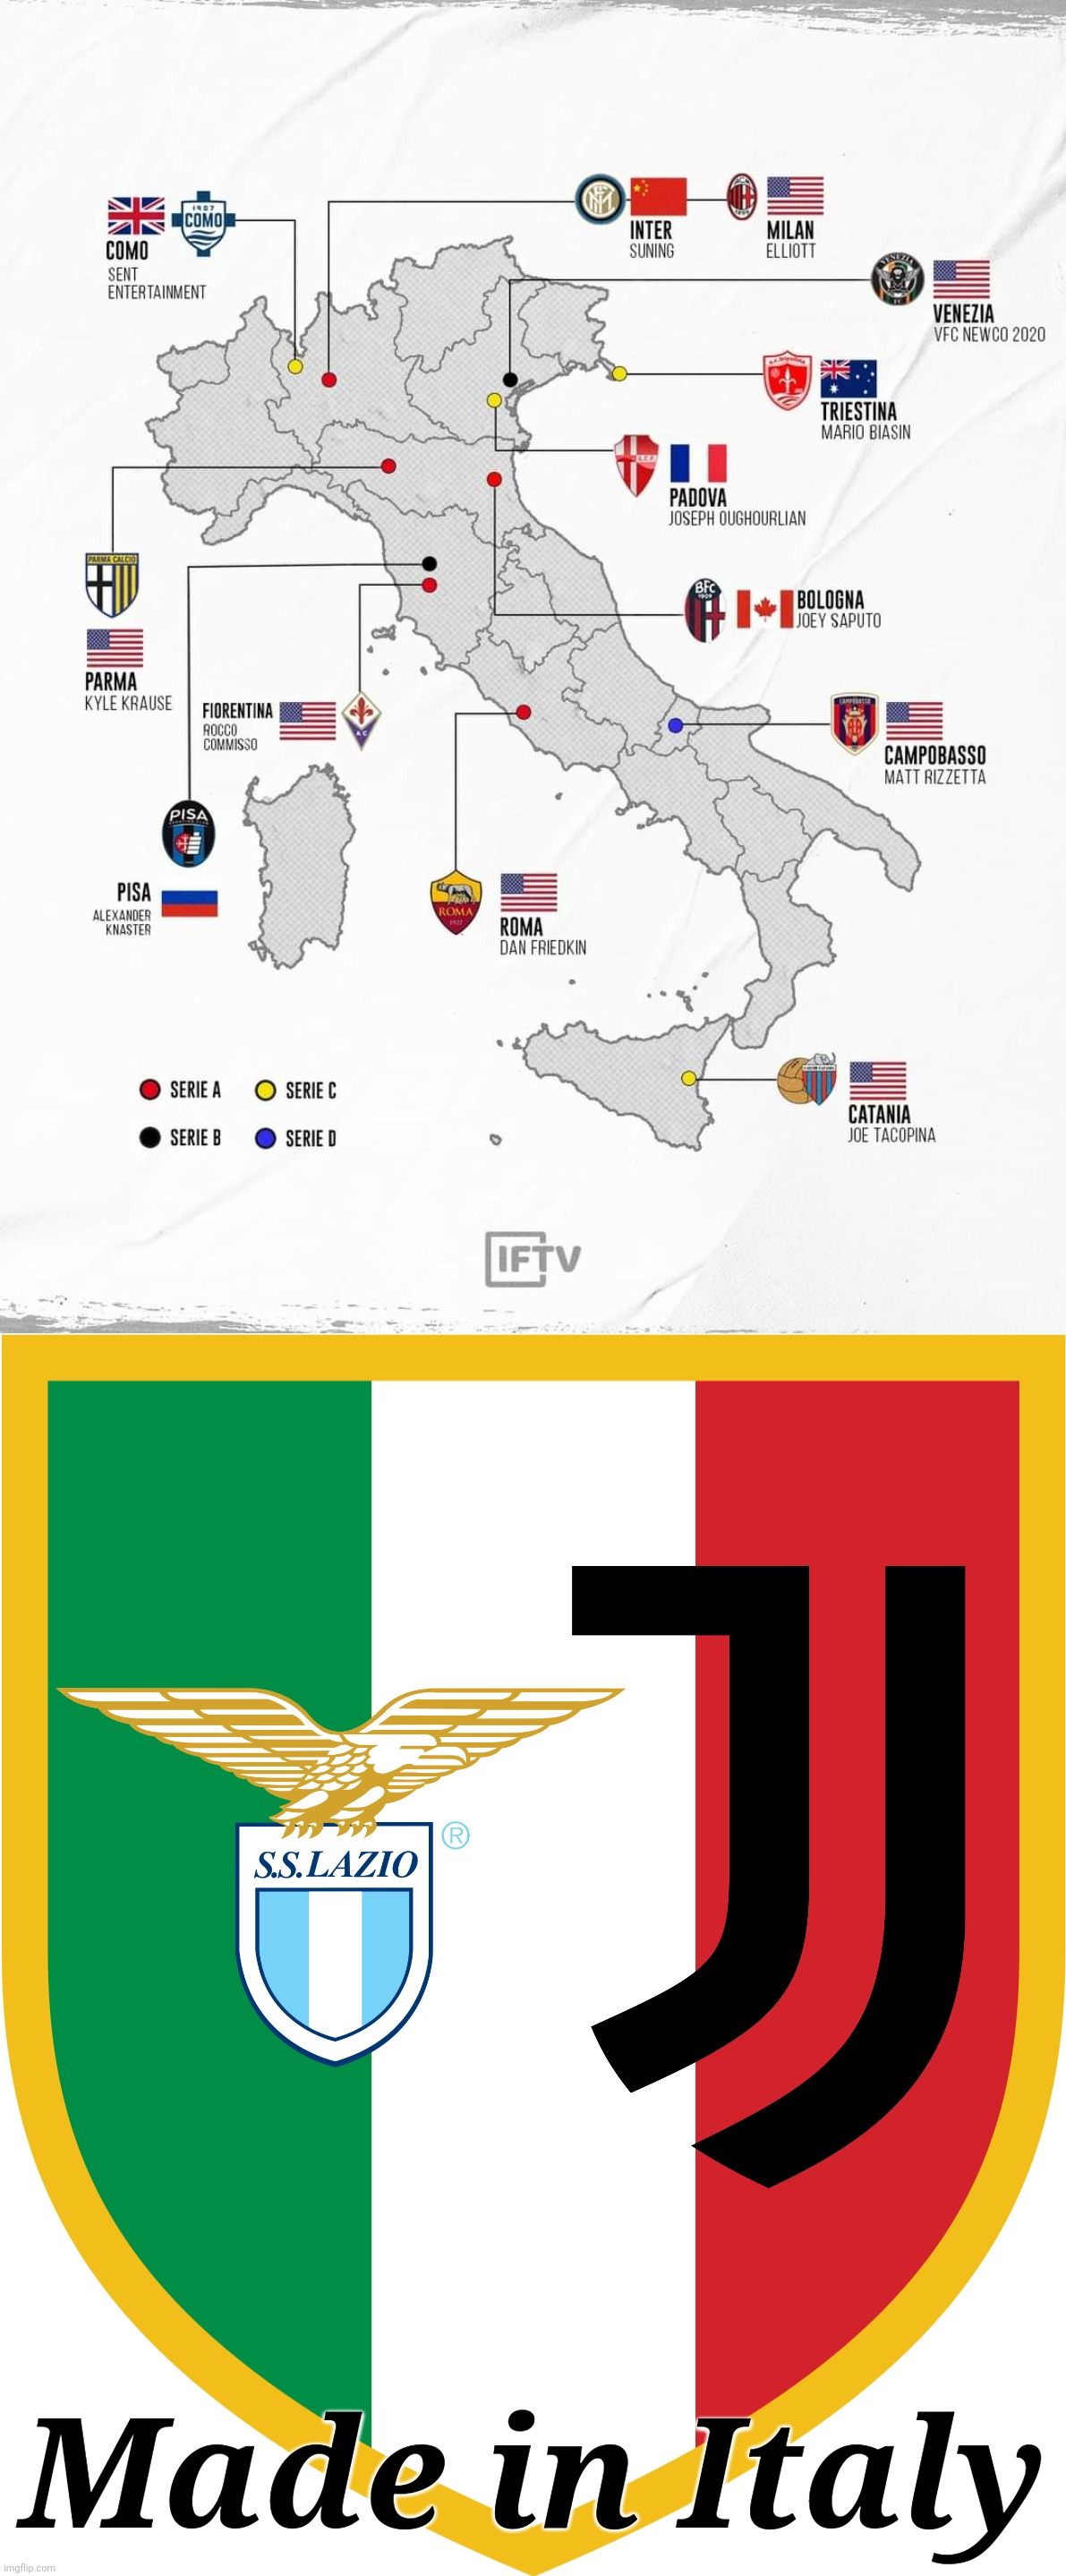 Italian Football is global. With Spezia rumoured to be close to selling, Lazio and Juventus are still made in Italy | Made in Italy | image tagged in memes,serie a,calcio,global | made w/ Imgflip meme maker